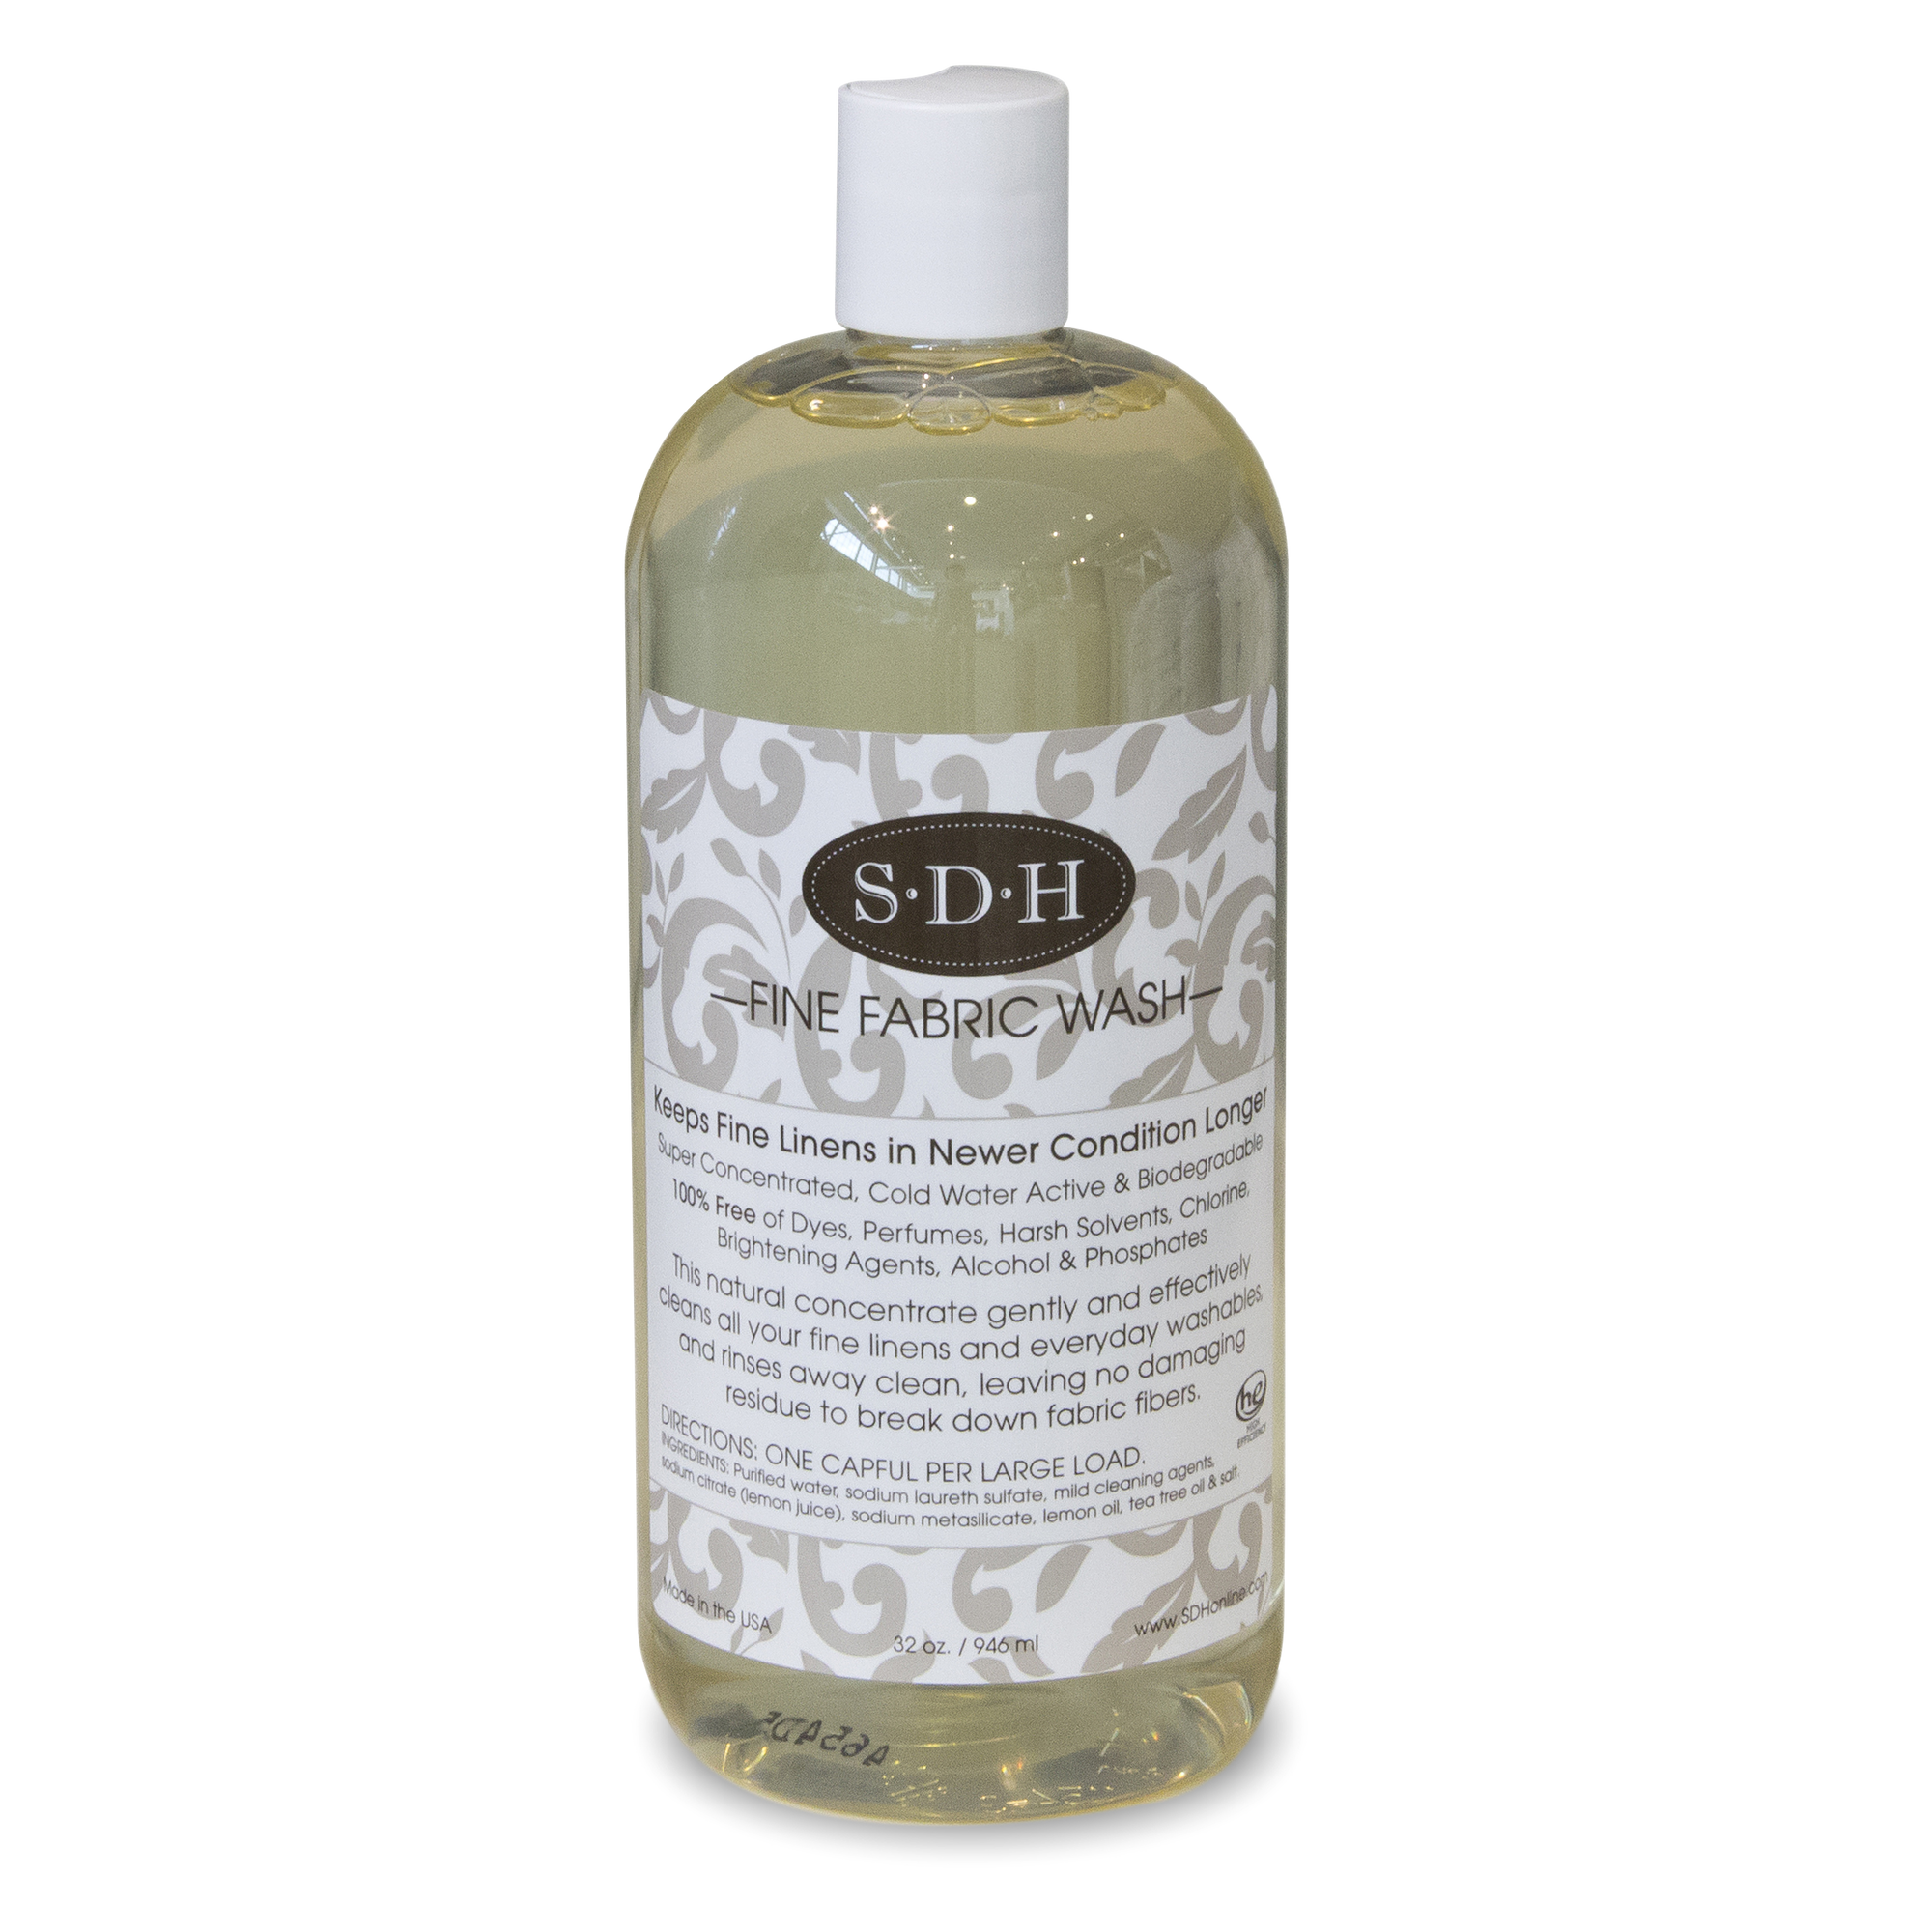 The SDH Fine Fabric Wash is pure and natural and leaves your linens fresh and clean.